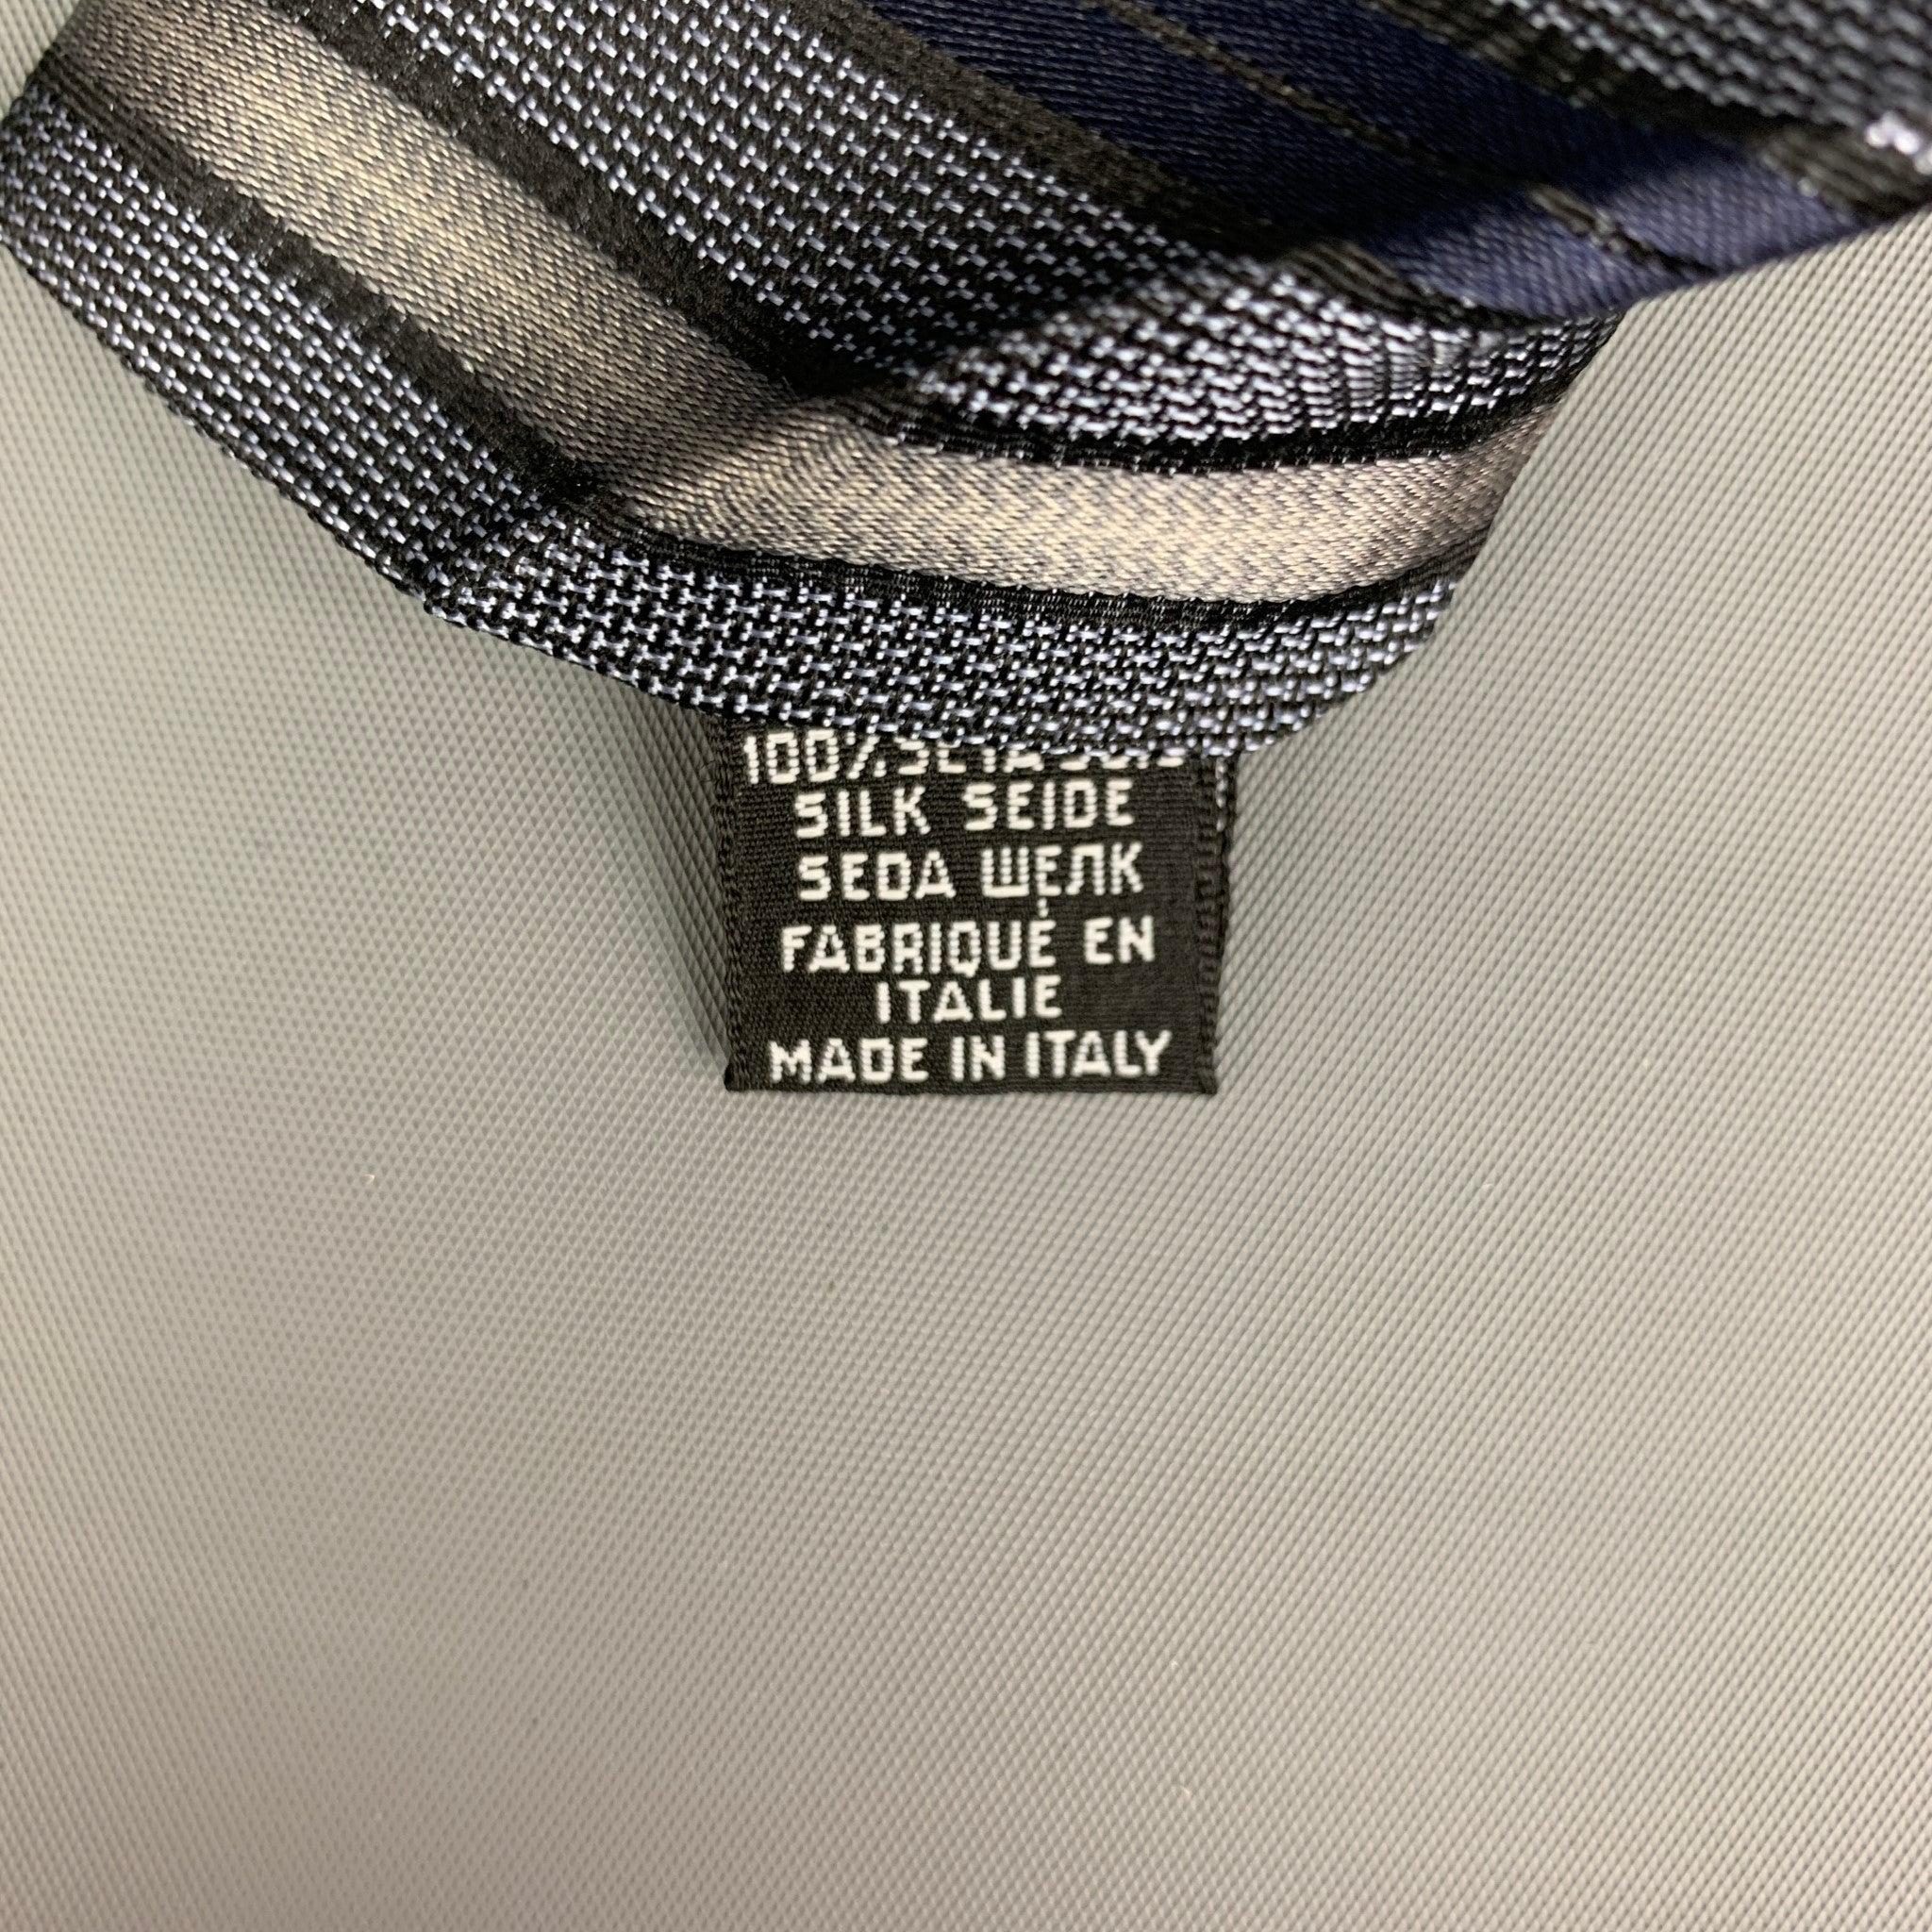 HUGO BOSS Charcoal, Black and Dark Blue Strip Silk Tie In Good Condition For Sale In San Francisco, CA